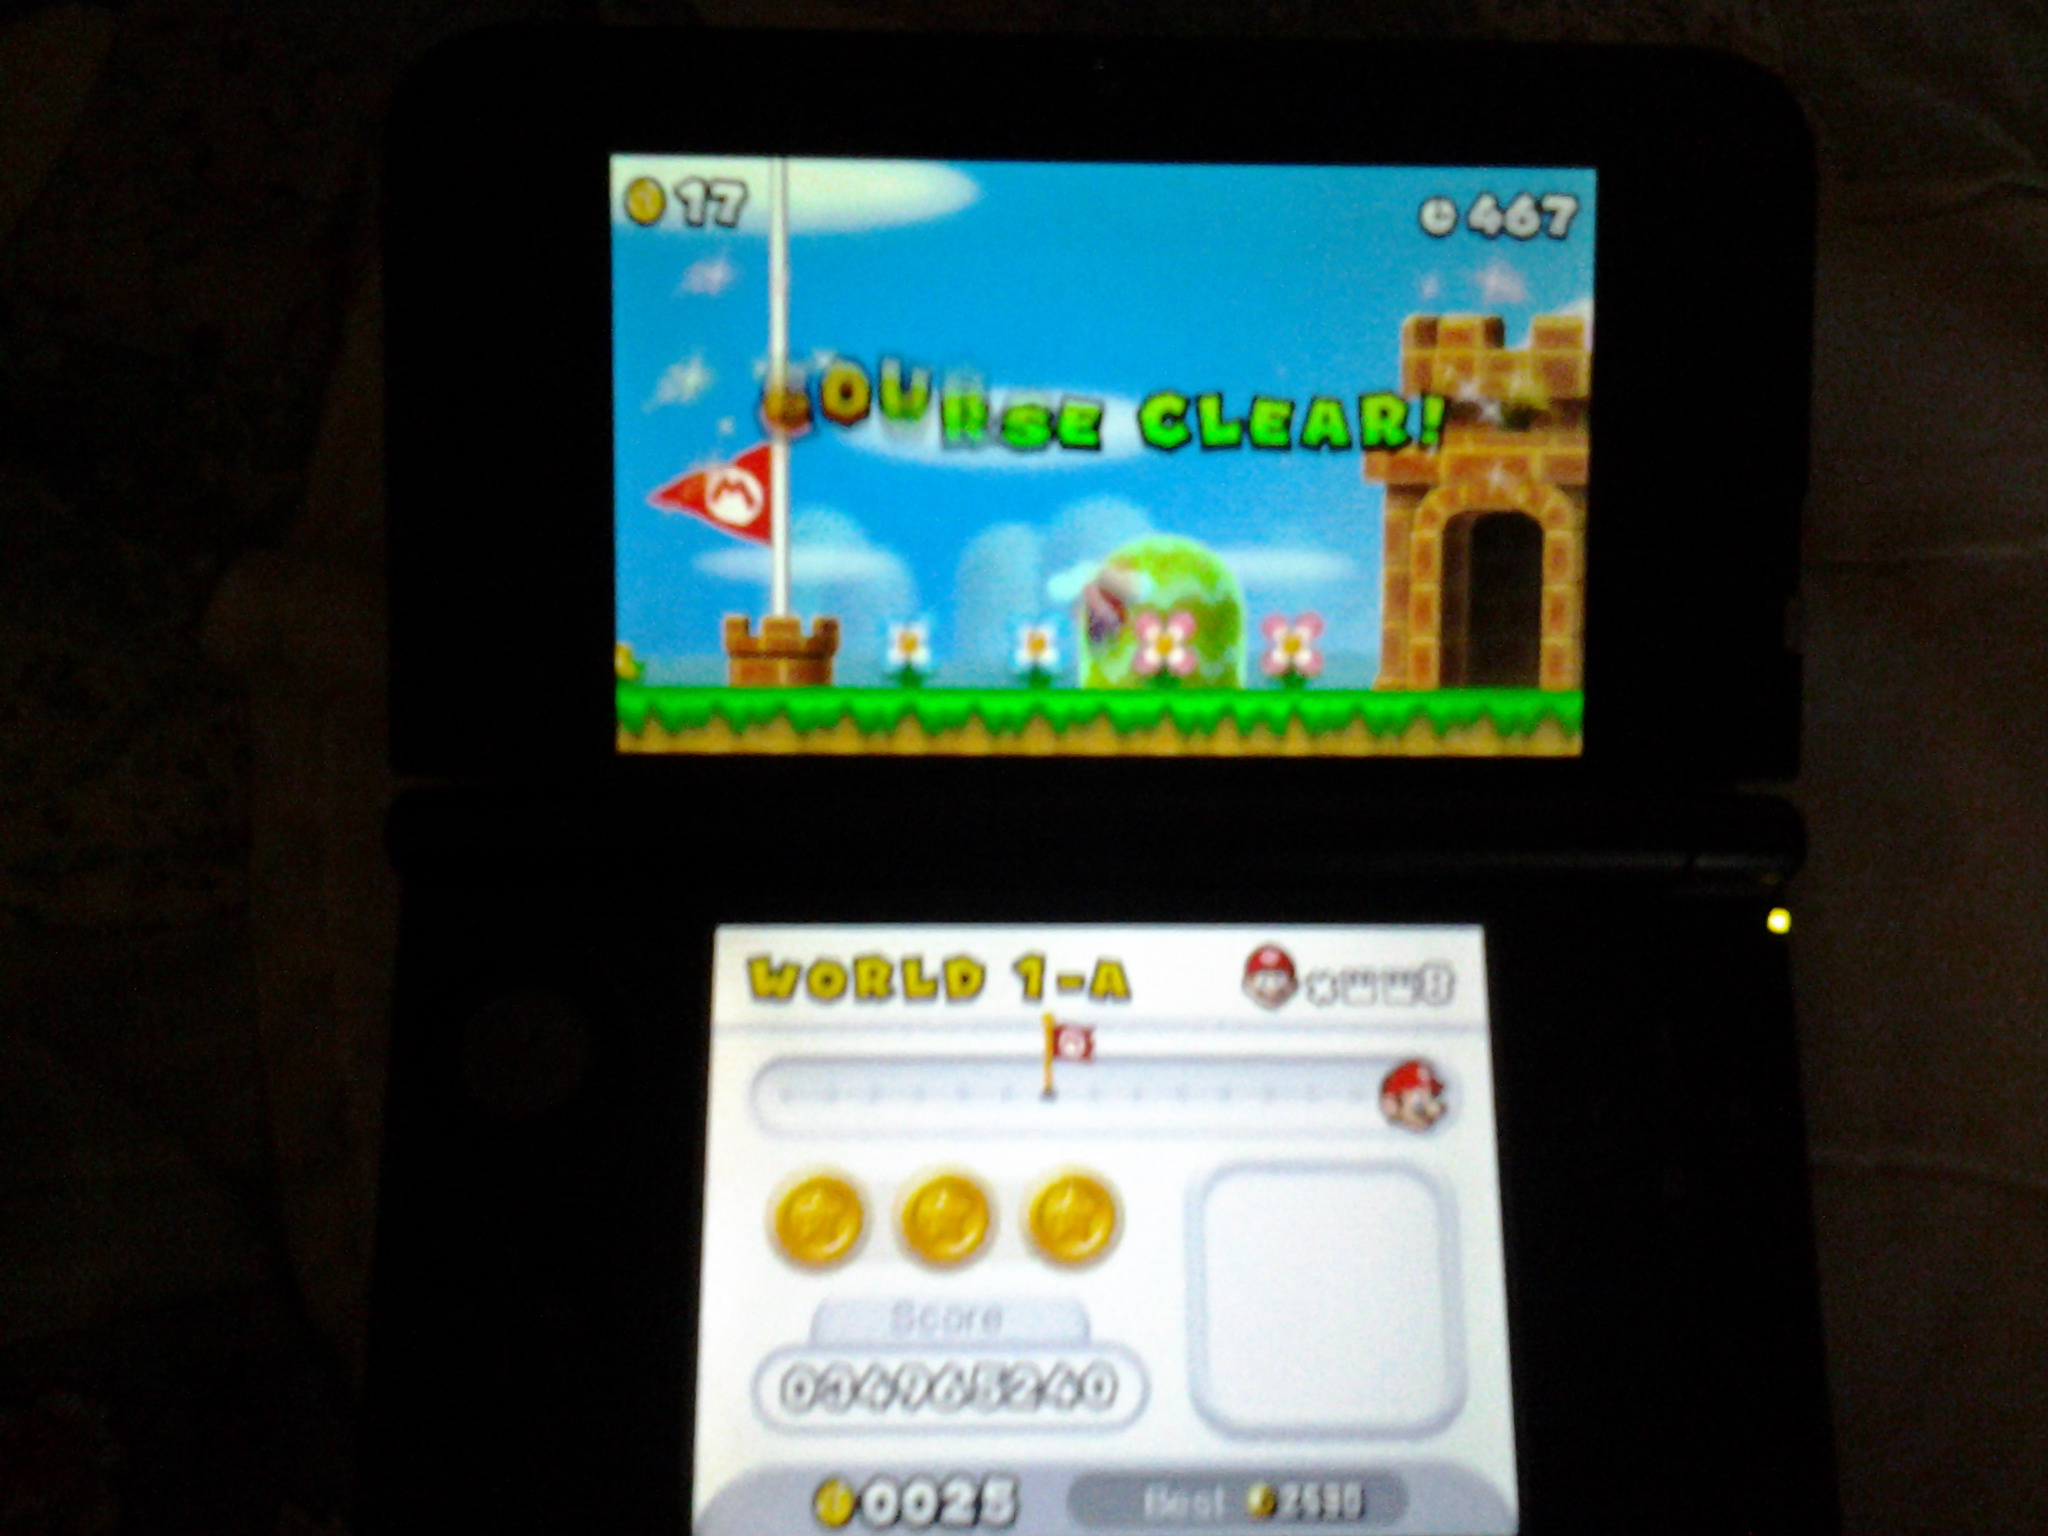 MatthewFelix: New Super Mario Bros. 2: World 1-A [Remaining Time] (Nintendo 3DS) 467 points on 2014-05-15 23:36:50